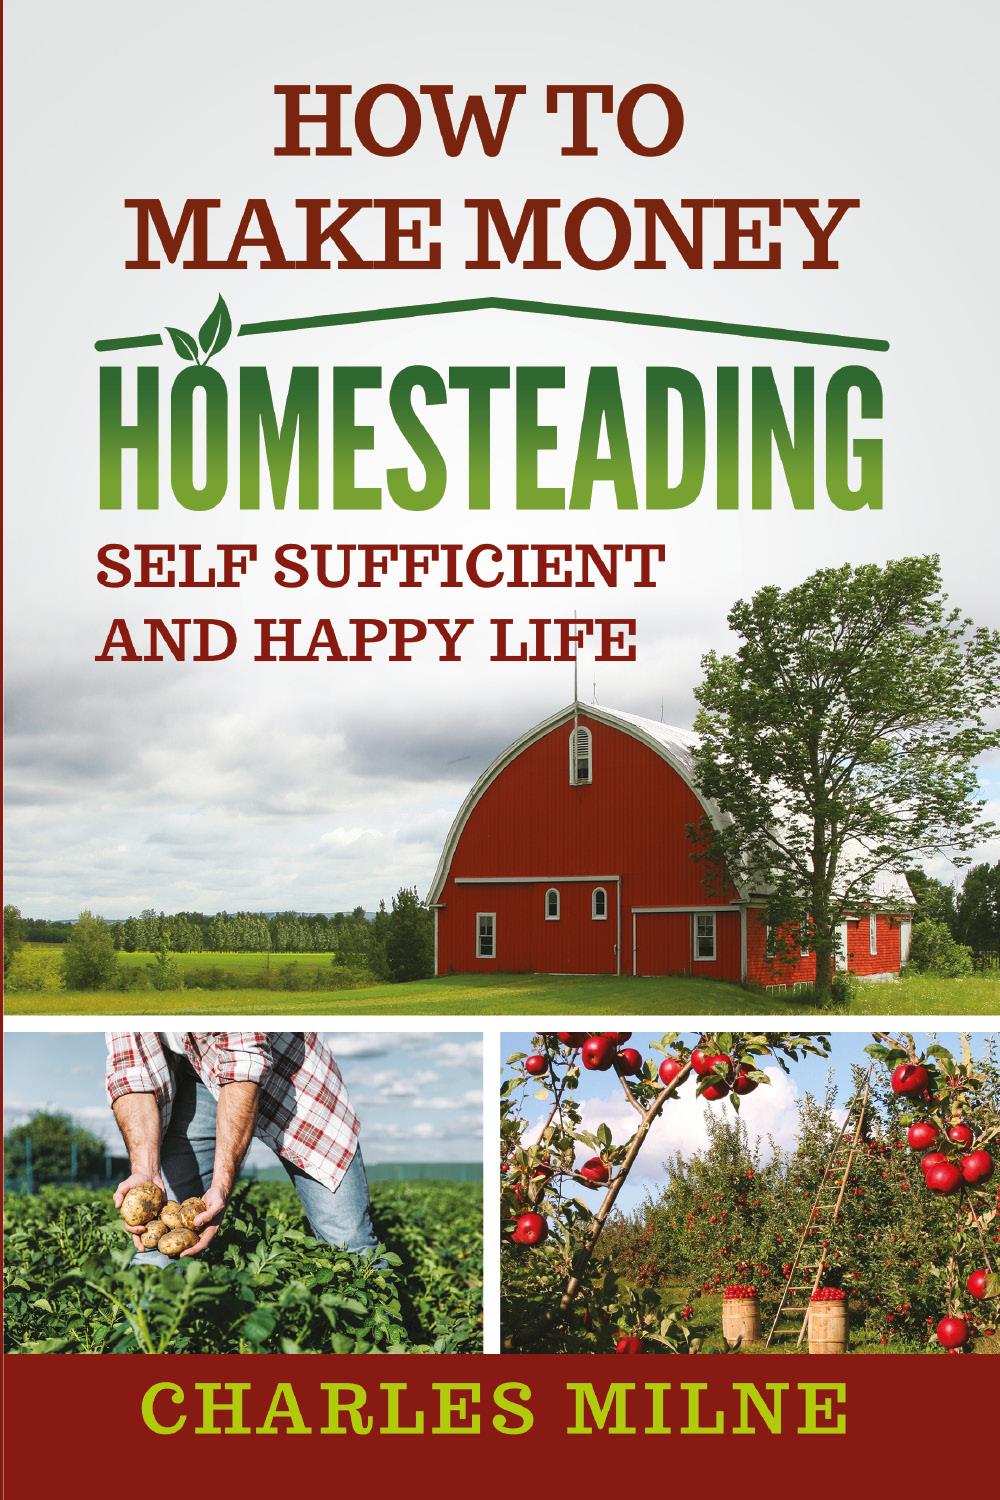 How to Make Money Homesteading. Self Sufficient and Happy Life